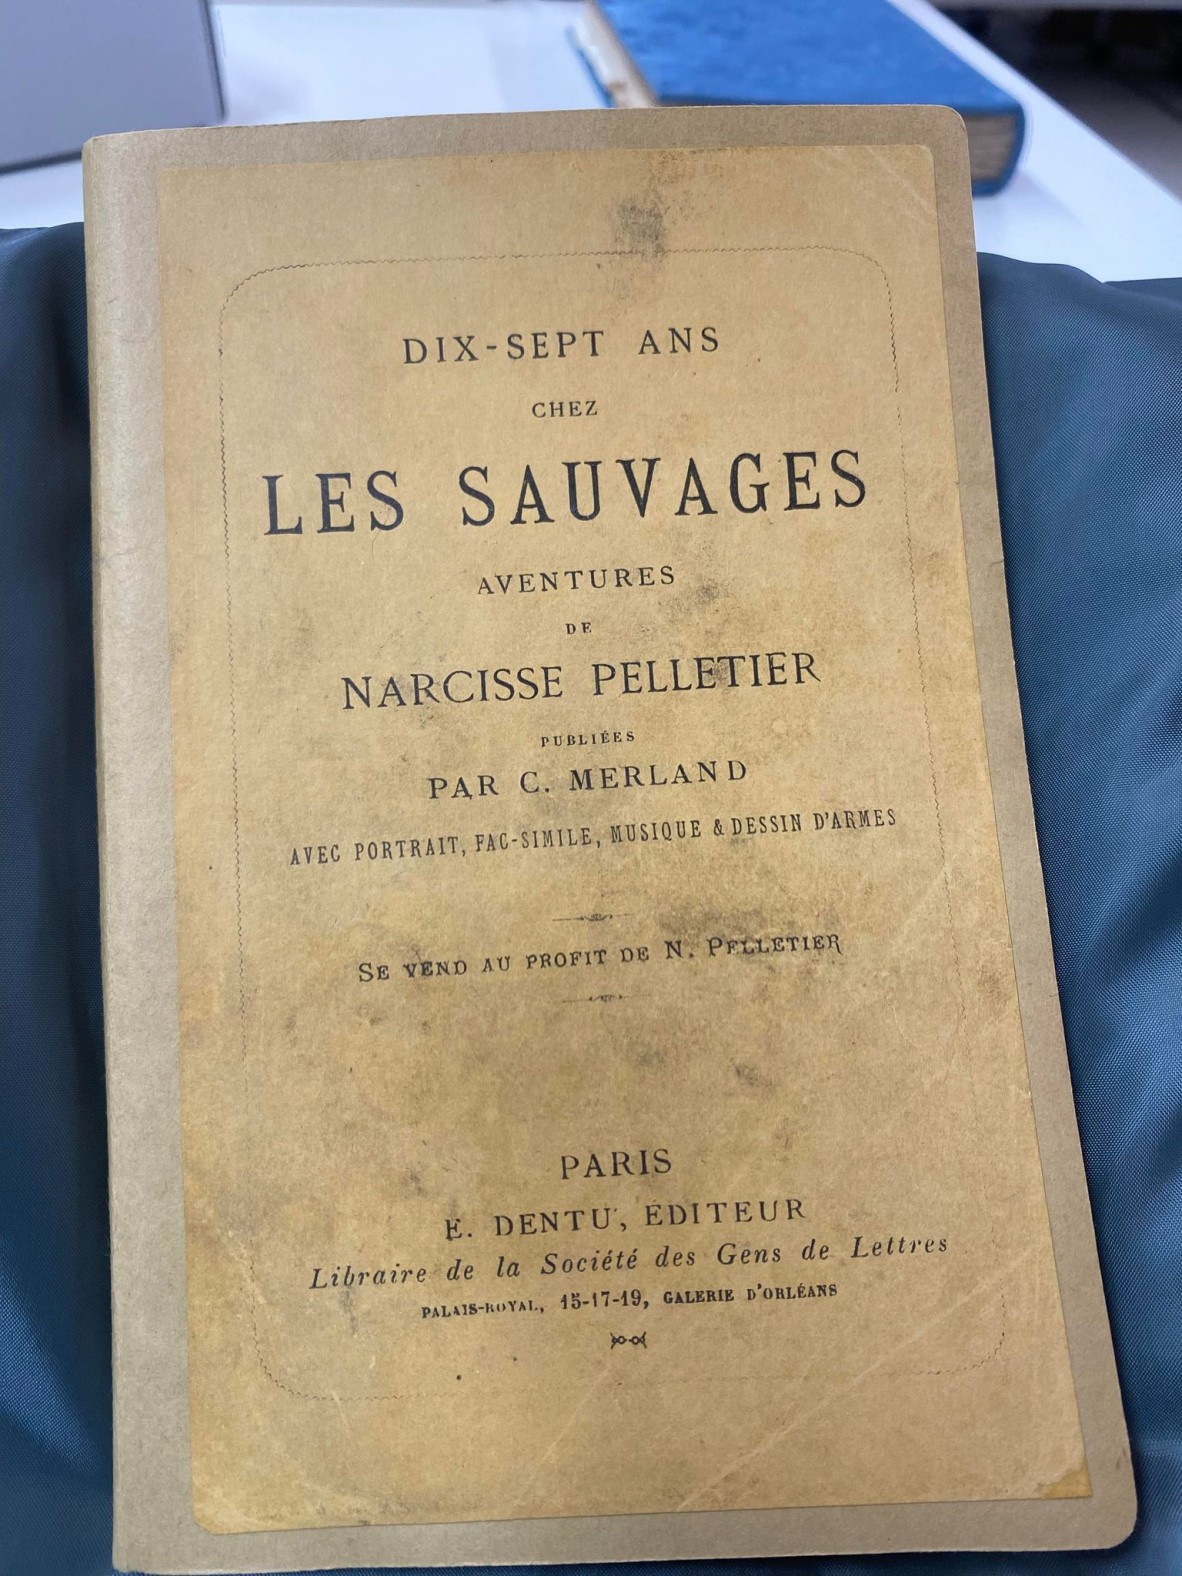 cover page of a old book in french 